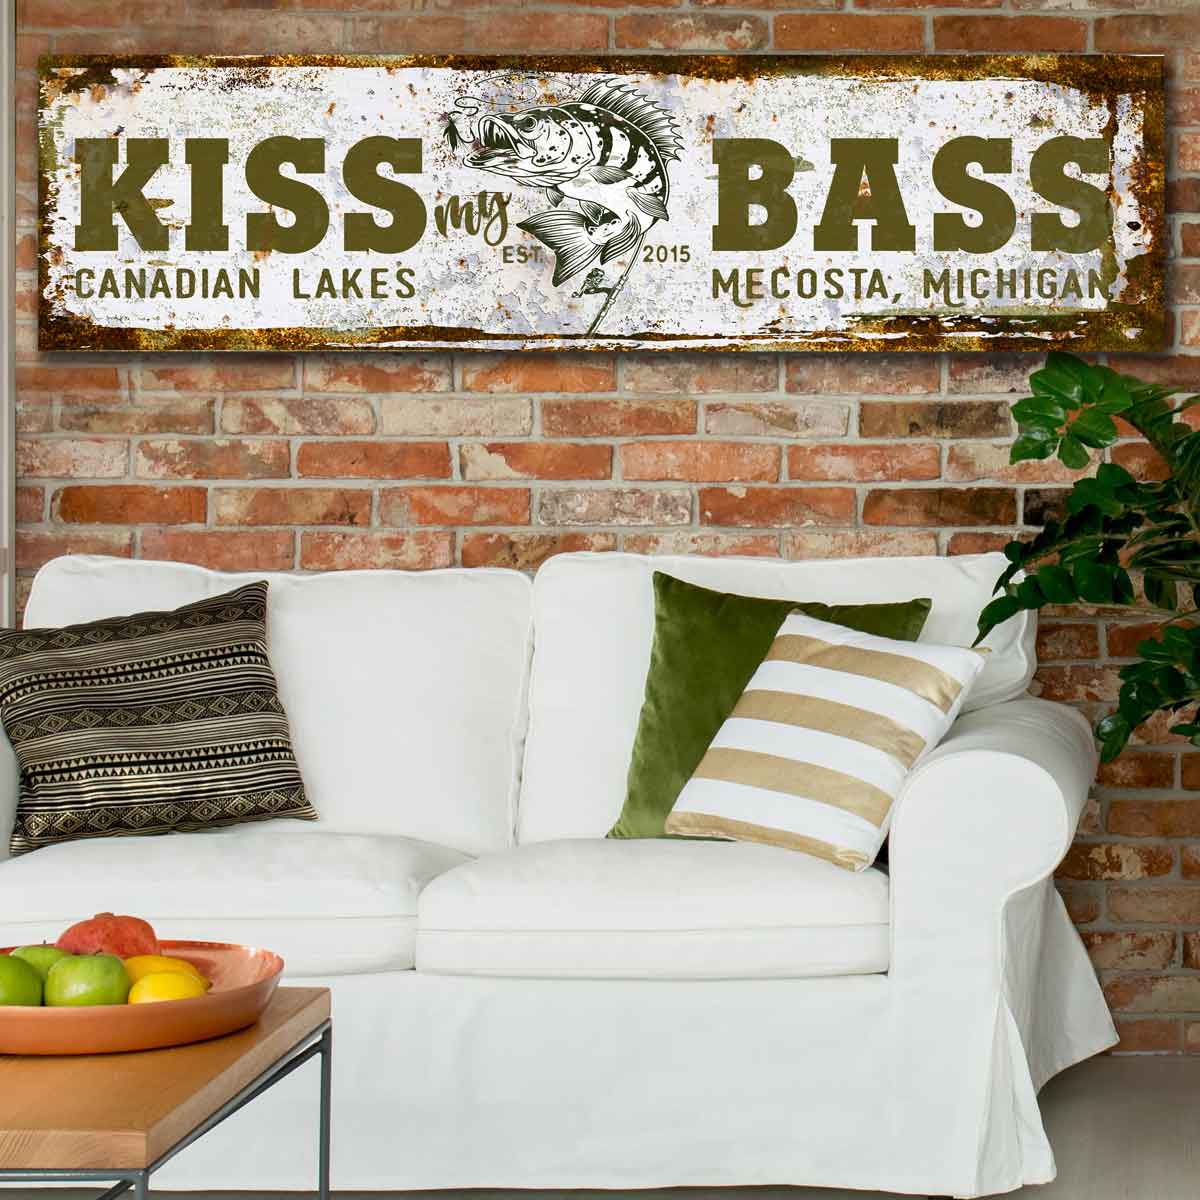 Personalized Deer Hunting Signs & Lodge Decor – Tailor Made Rooms Home Decor